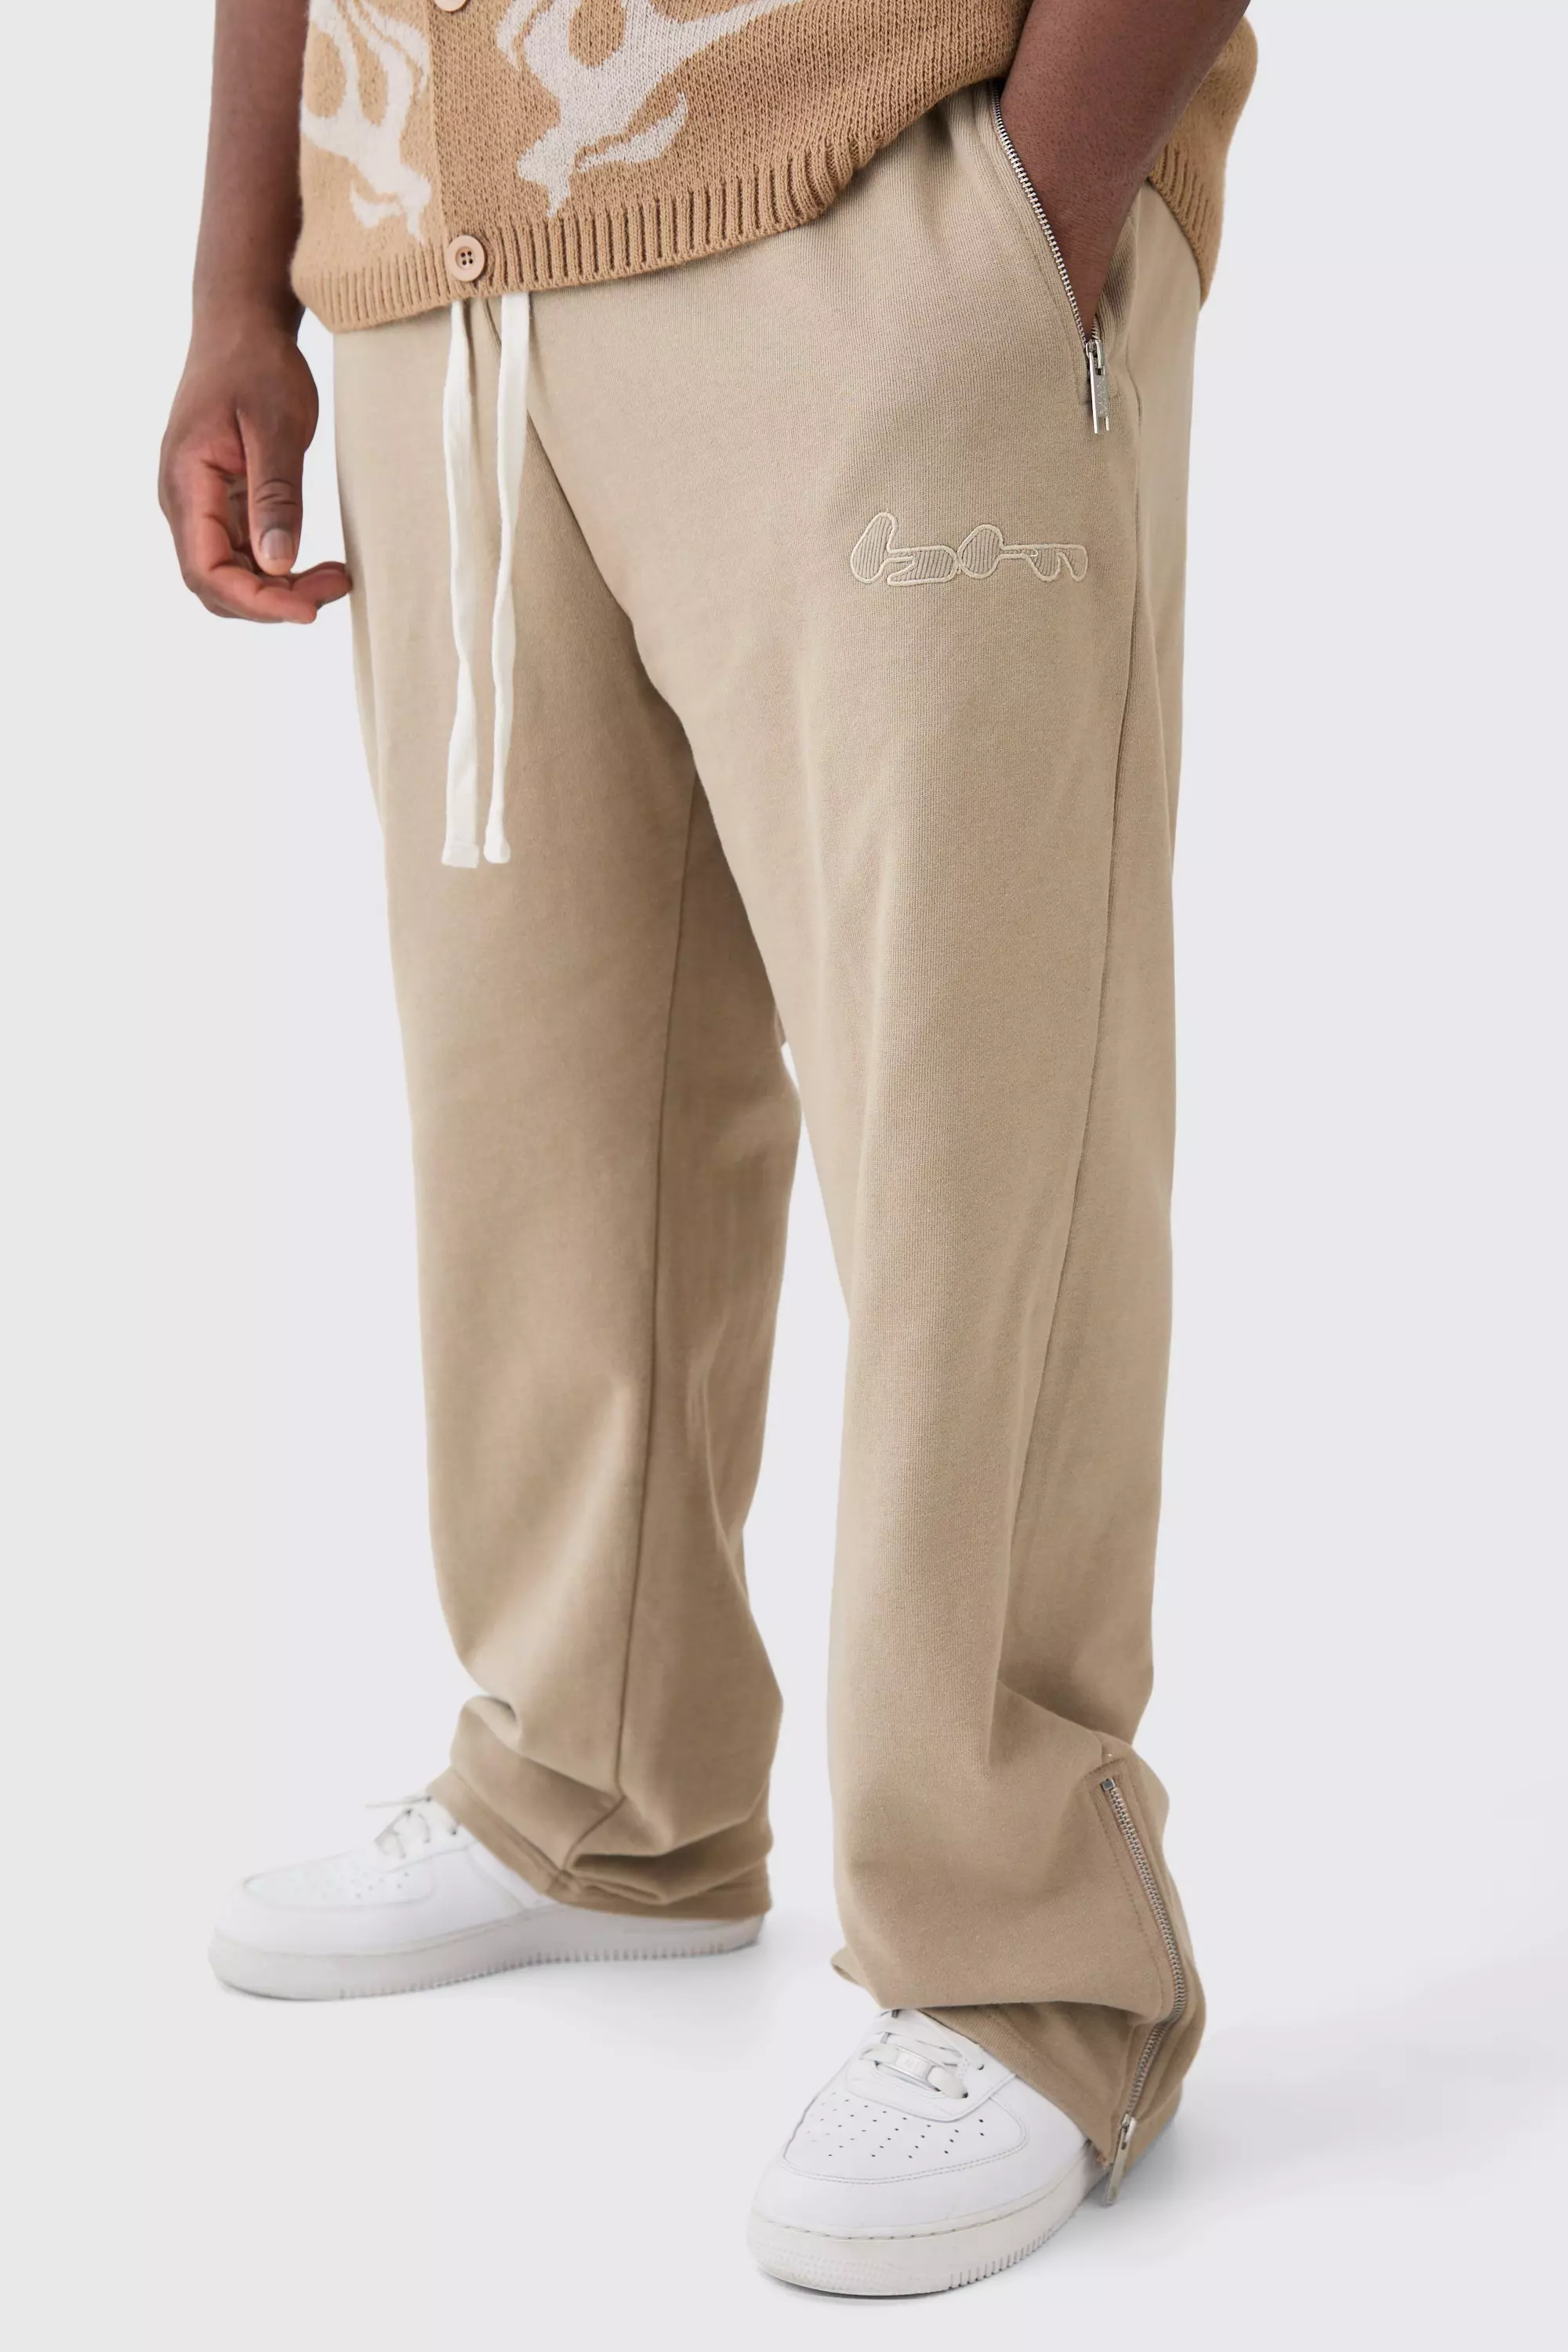 Plus Oversized Loopback Ribbed Applique Zip Jogger pale grey